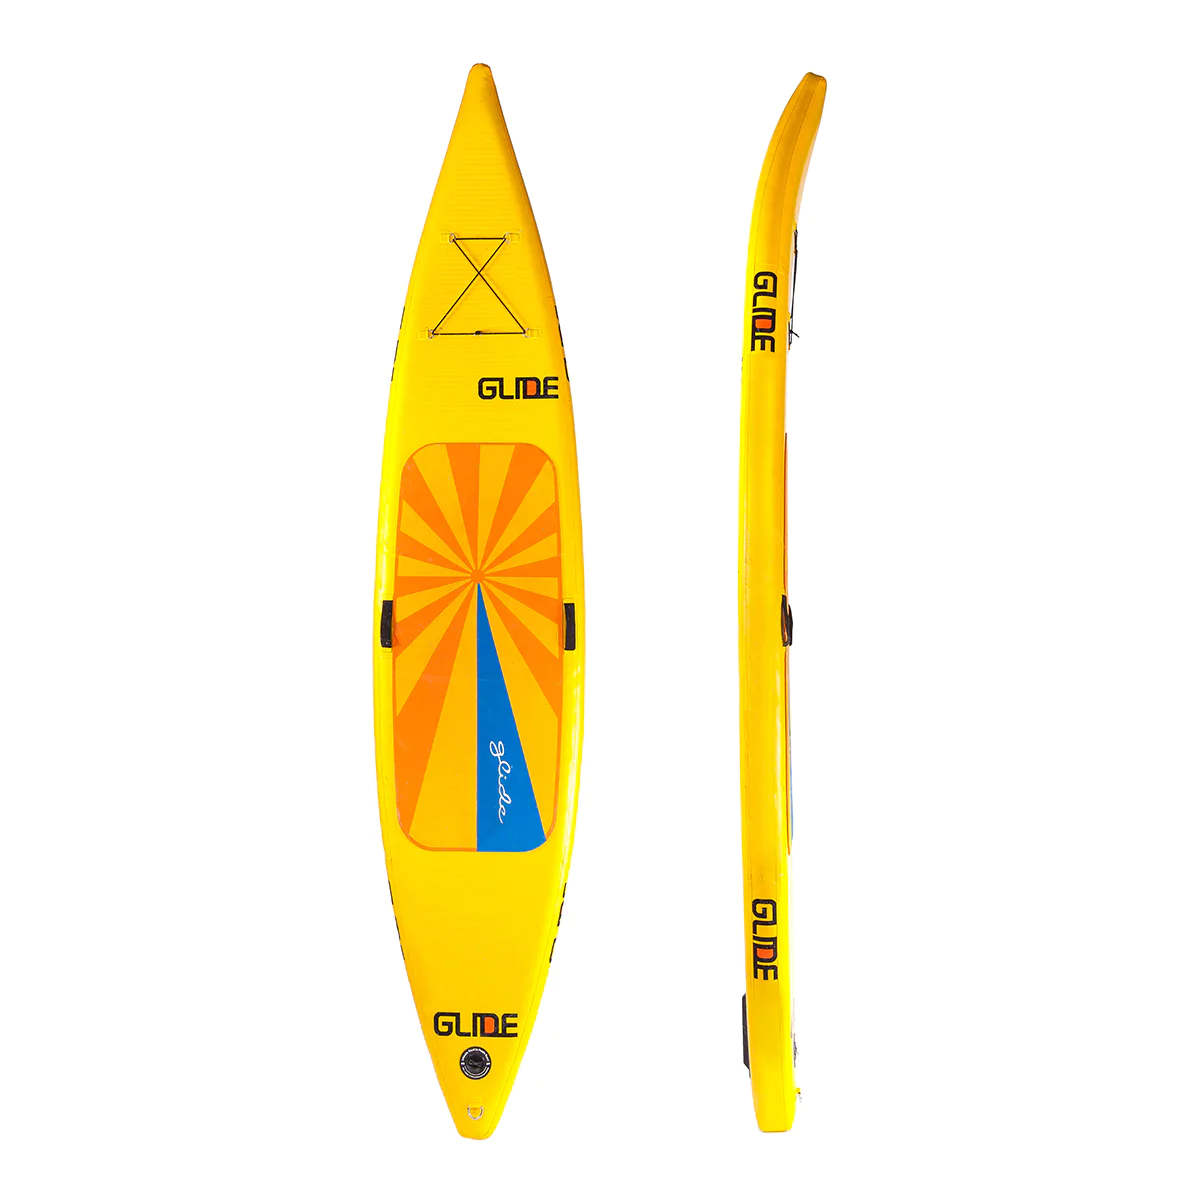 Great touring sups without a paddle holder with a displacement hull and thinner board tail with optimal board length for the inflatable paddleboard.